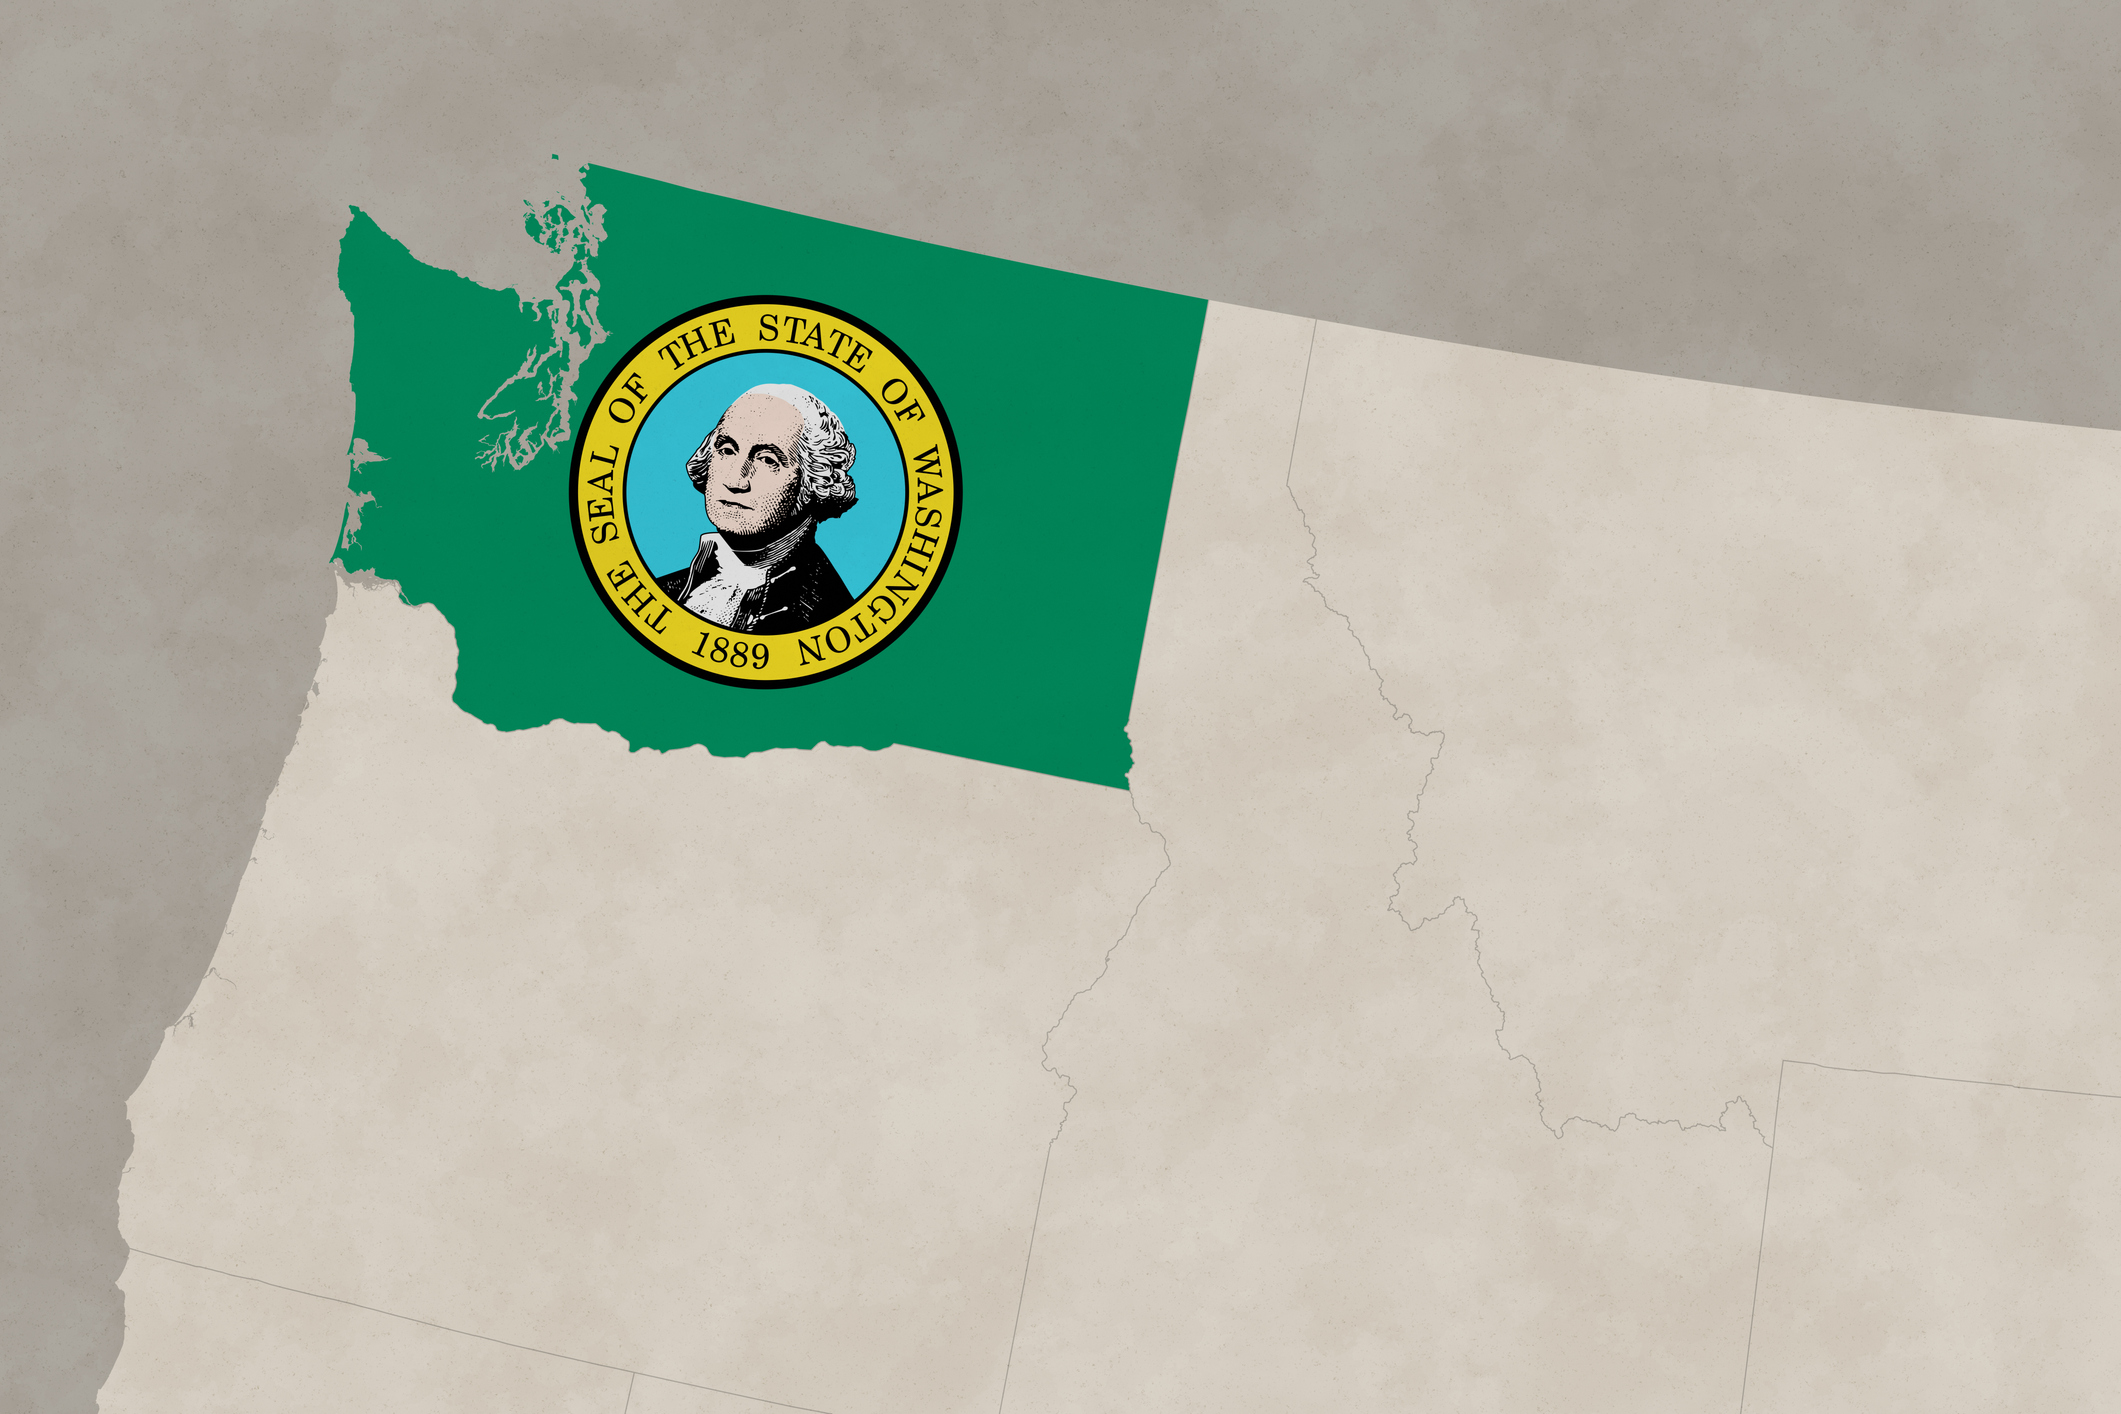 Map and flag of the state of Washington